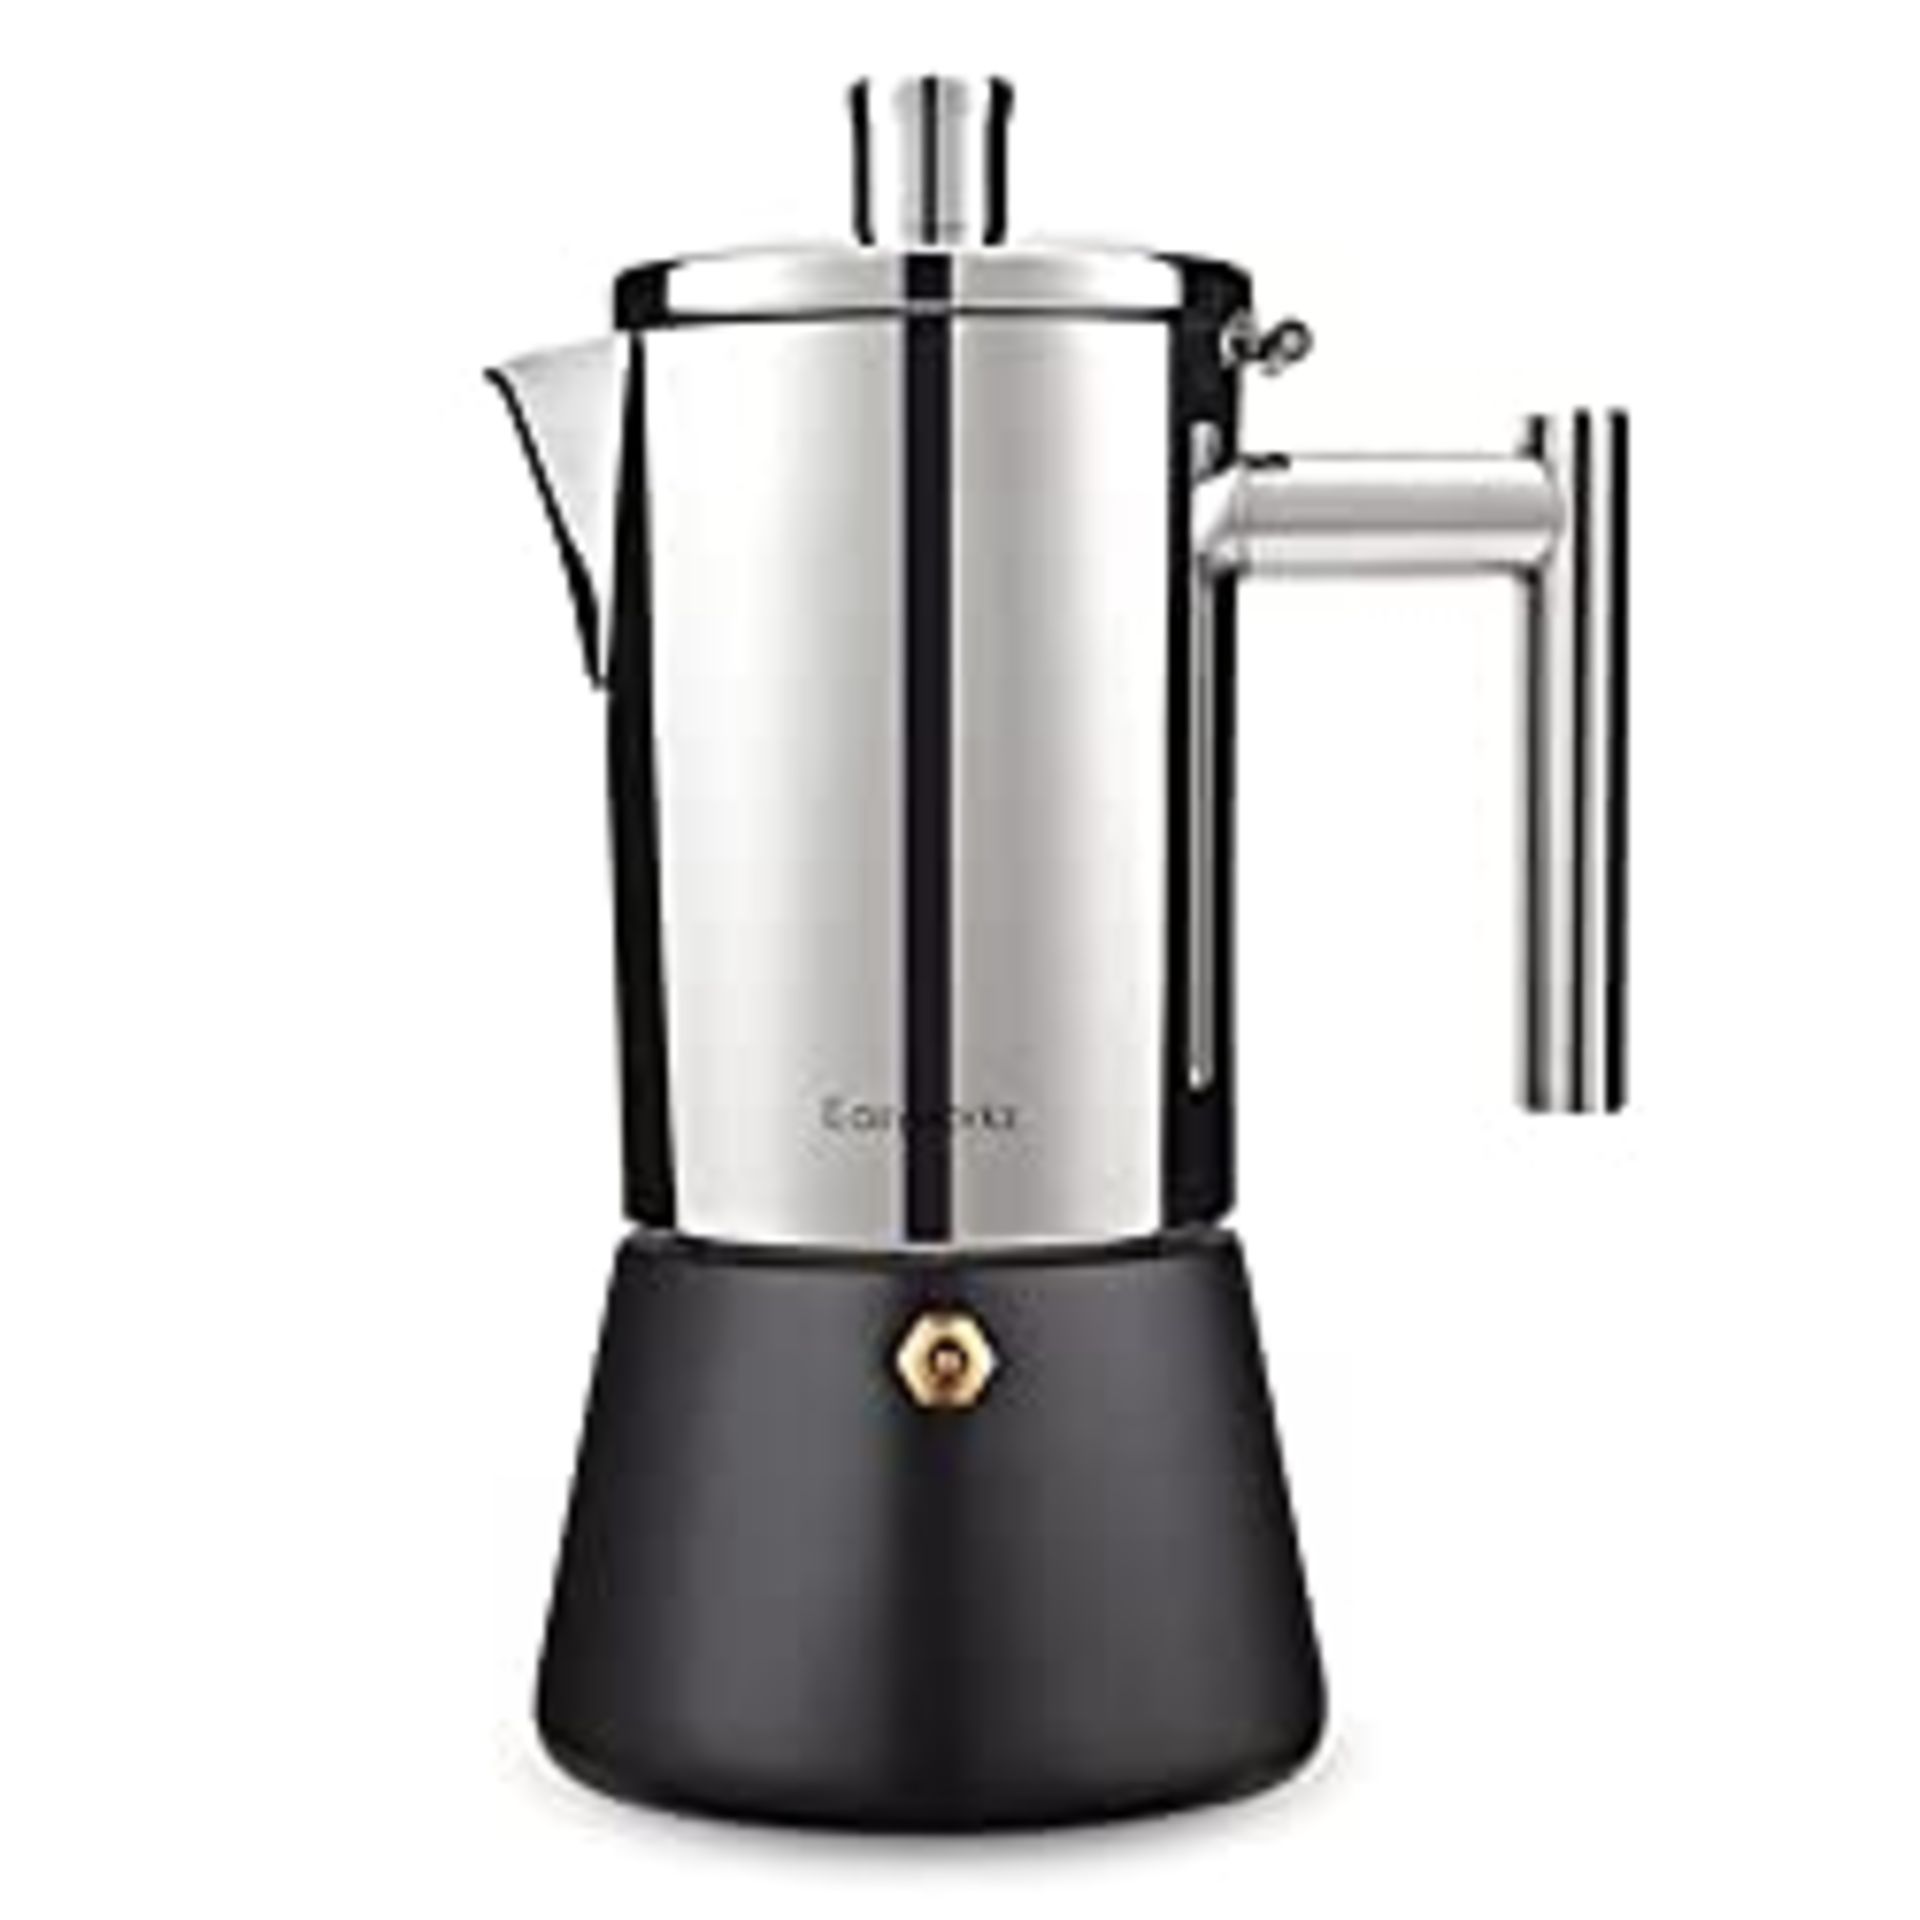 RRP £36.98 Easyworkz Diego Stovetop Espresso Maker Stainless Steel